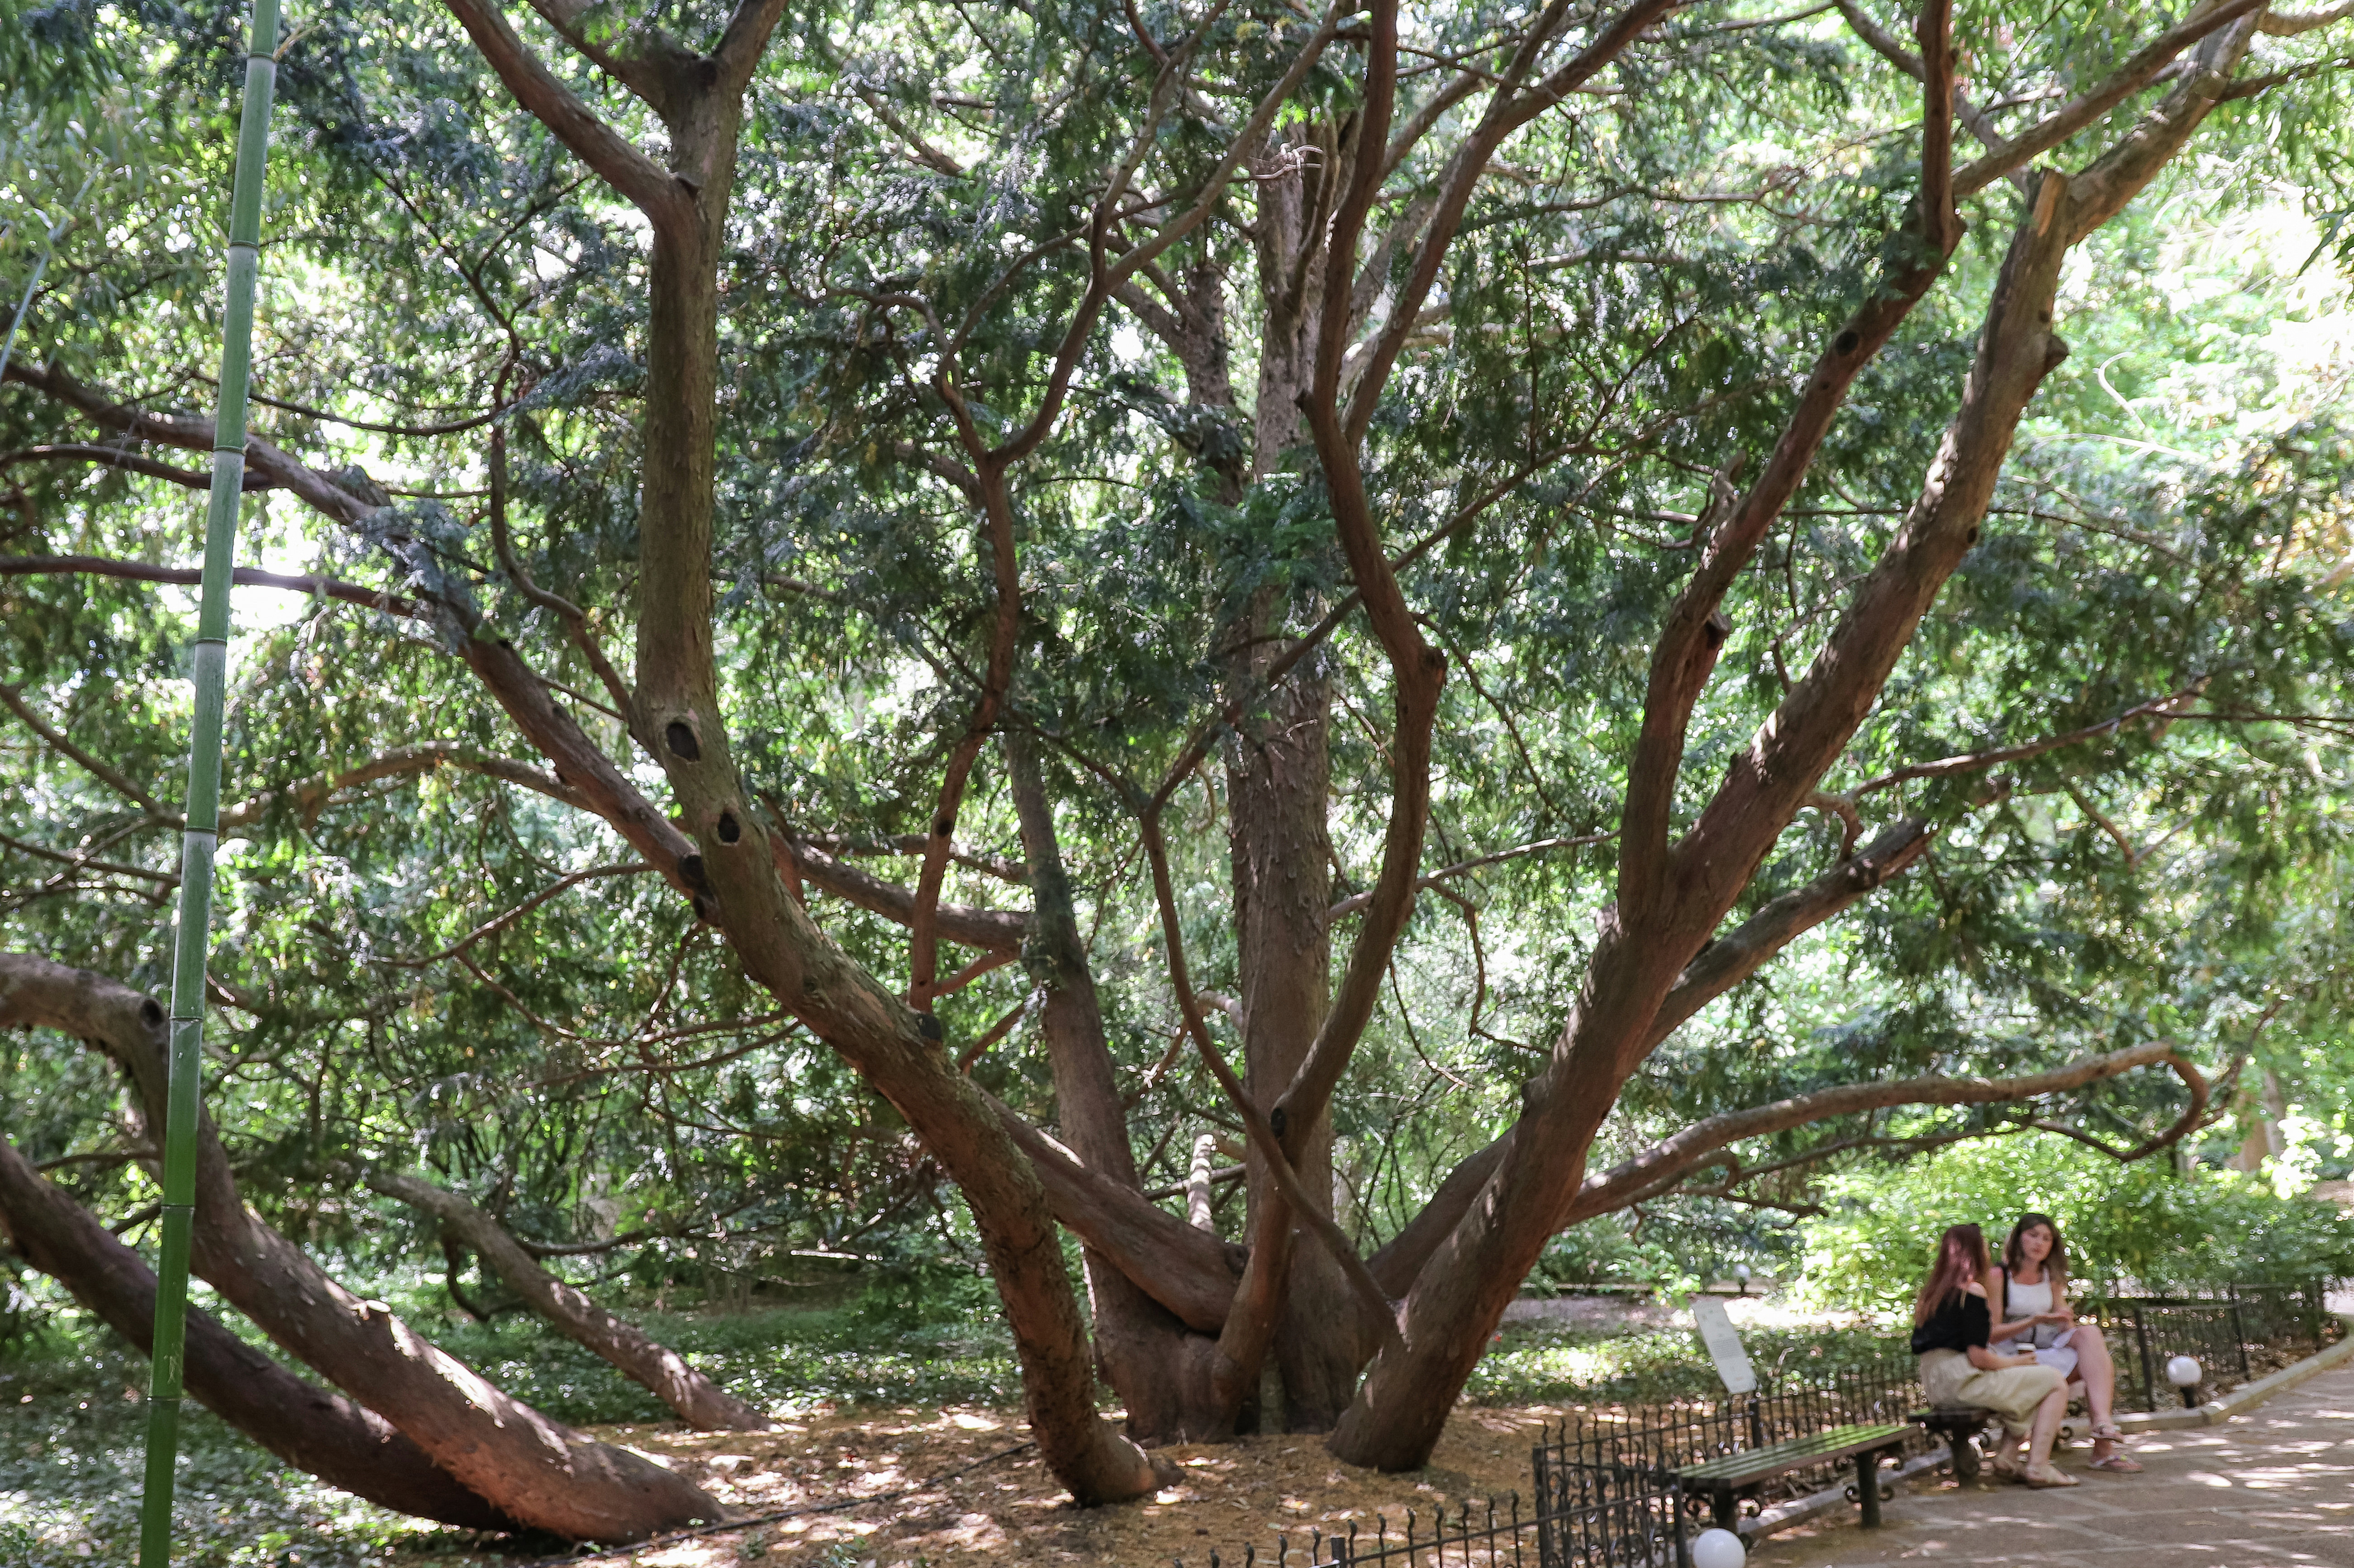 Yew berry has been living safely in the Nikitsky Botanical Garden for more than 5 centuries